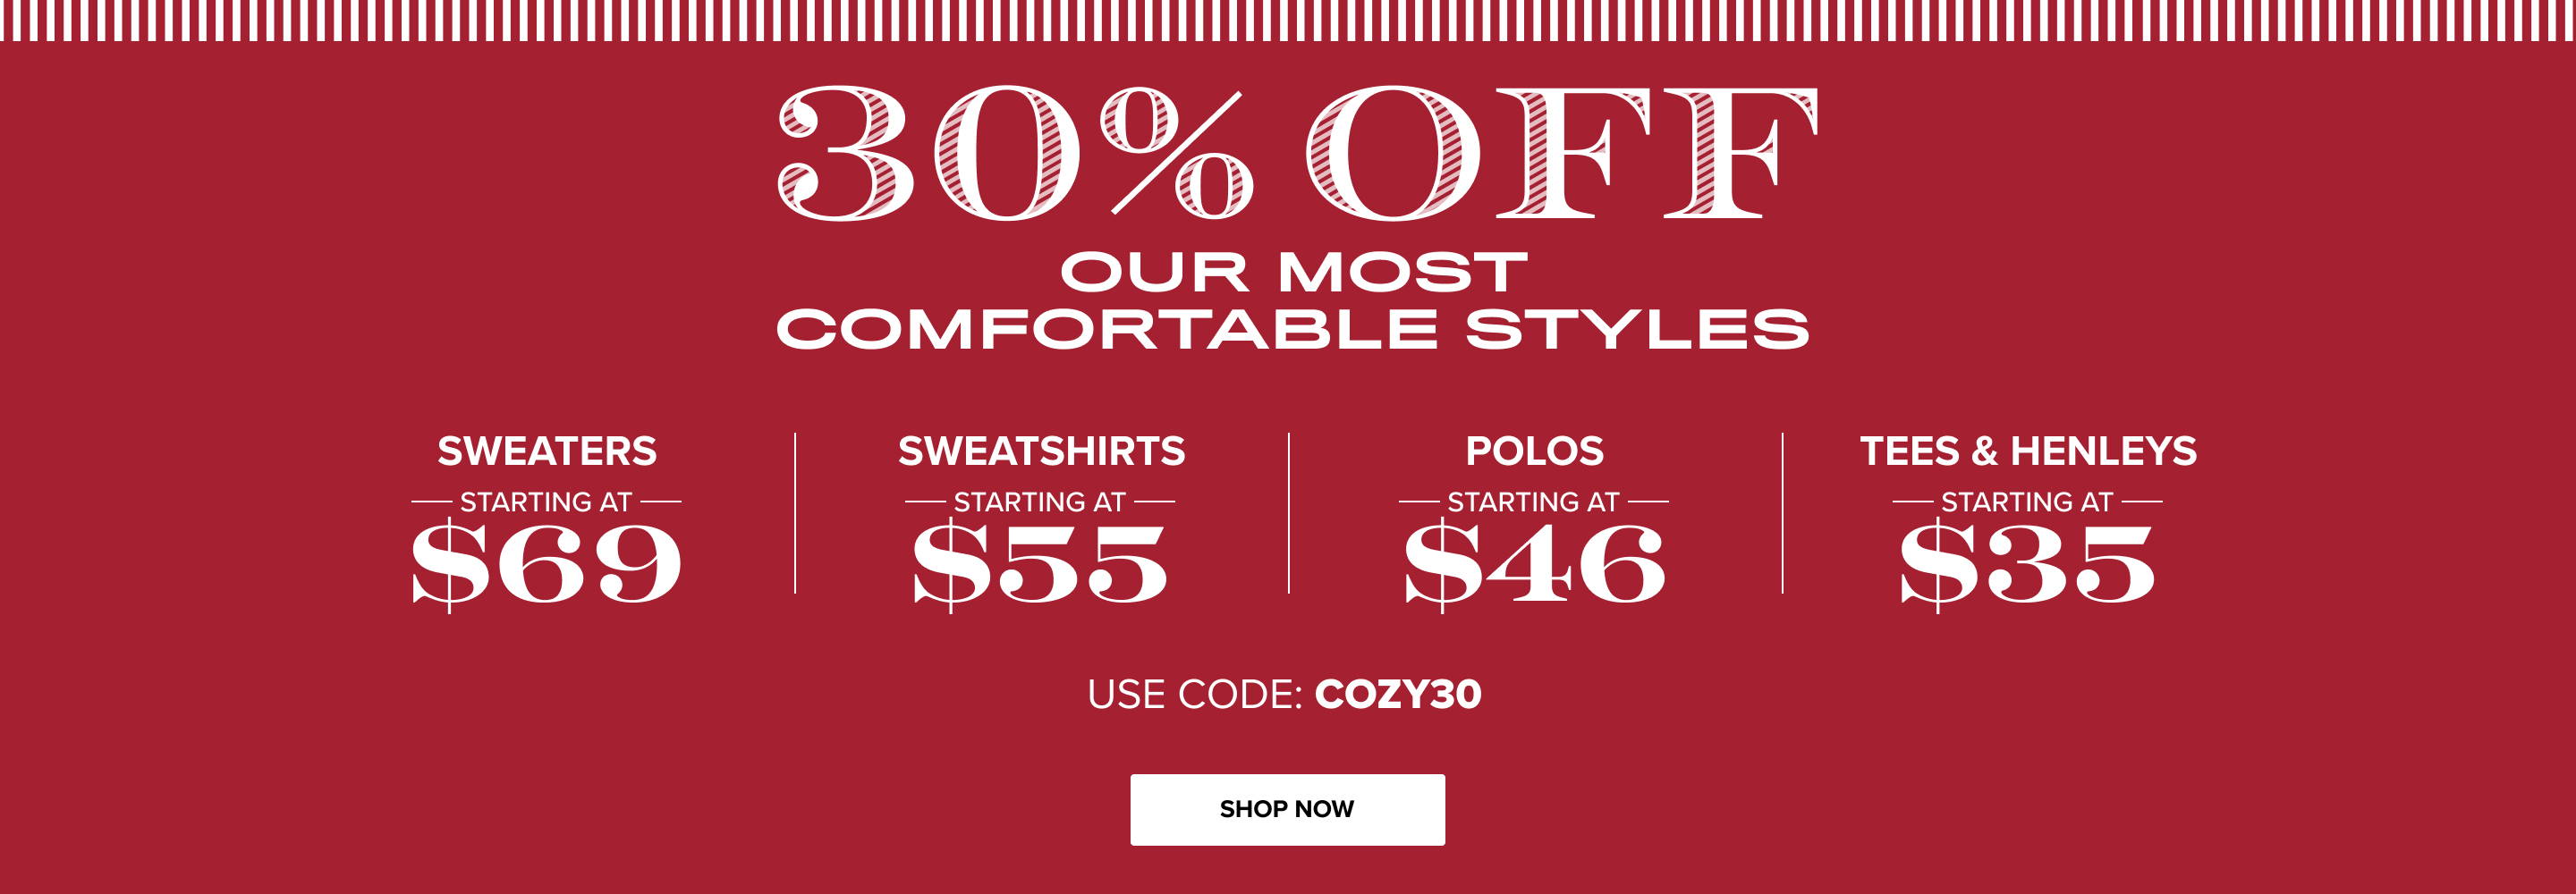 30% Off Our Most Comfortable Styles | Sweaters Starting at $69, Sweatshirts starting at $55, Polos Starting at $46, Tees & Henleys starting at $35